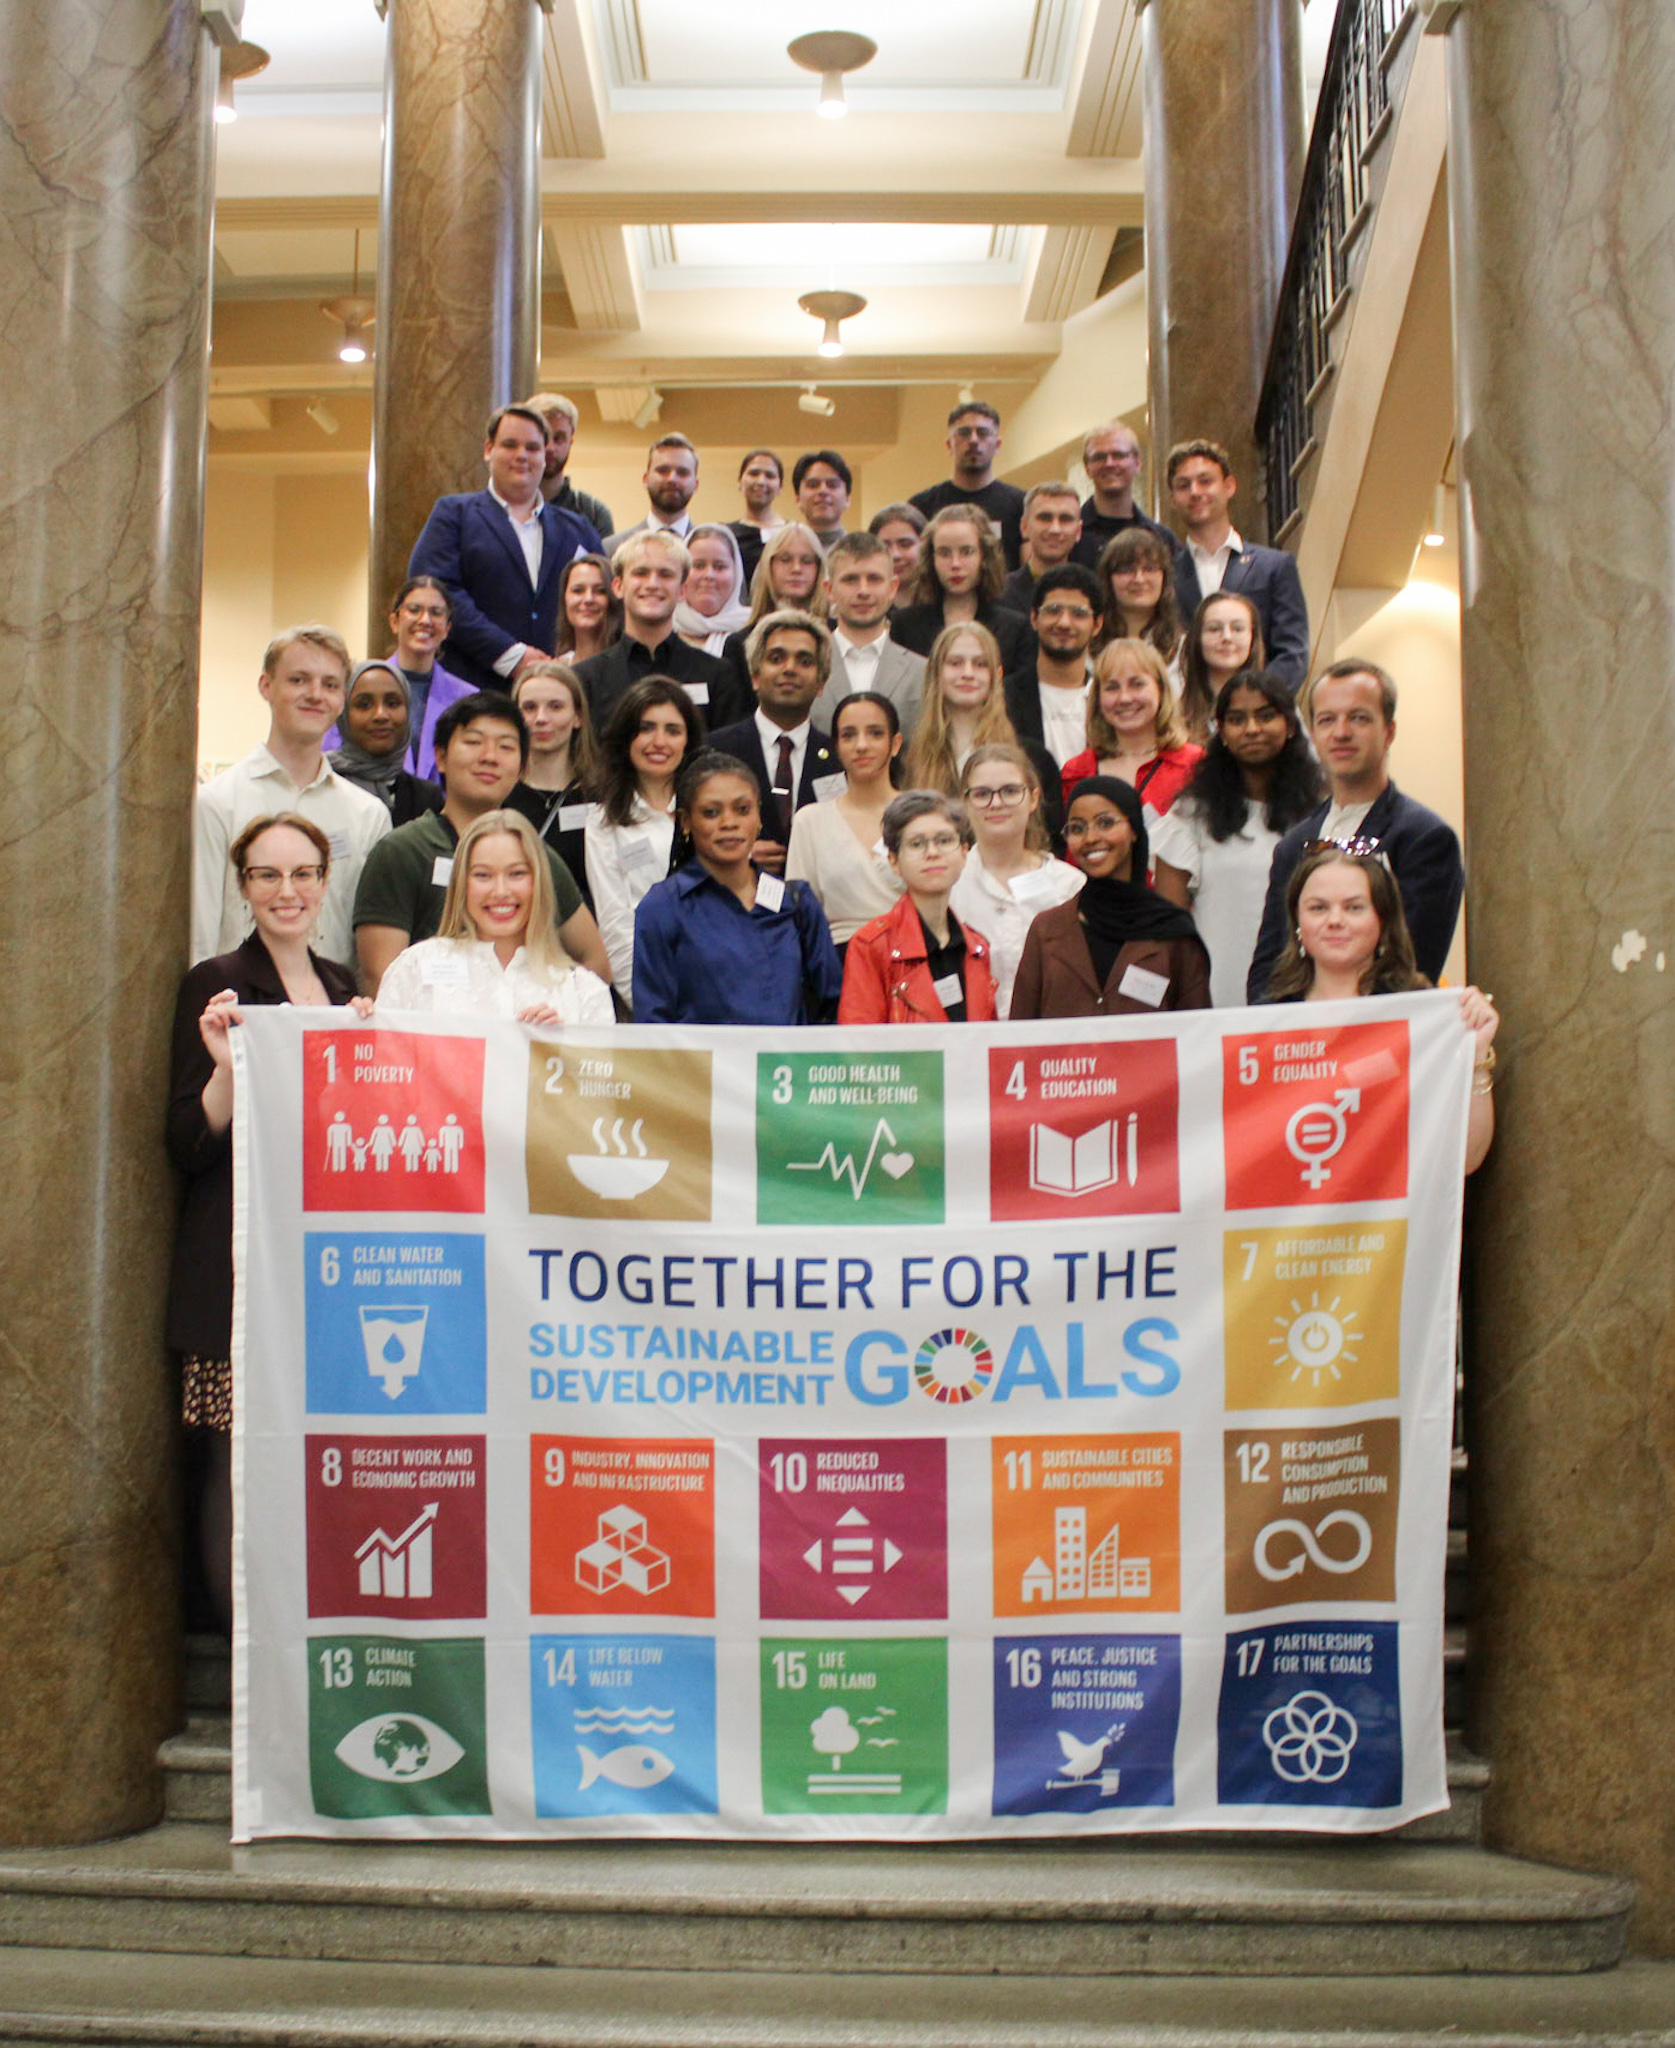 In the picture are about 40 young people standing on stairs with a sustainable development goals flag in the front.